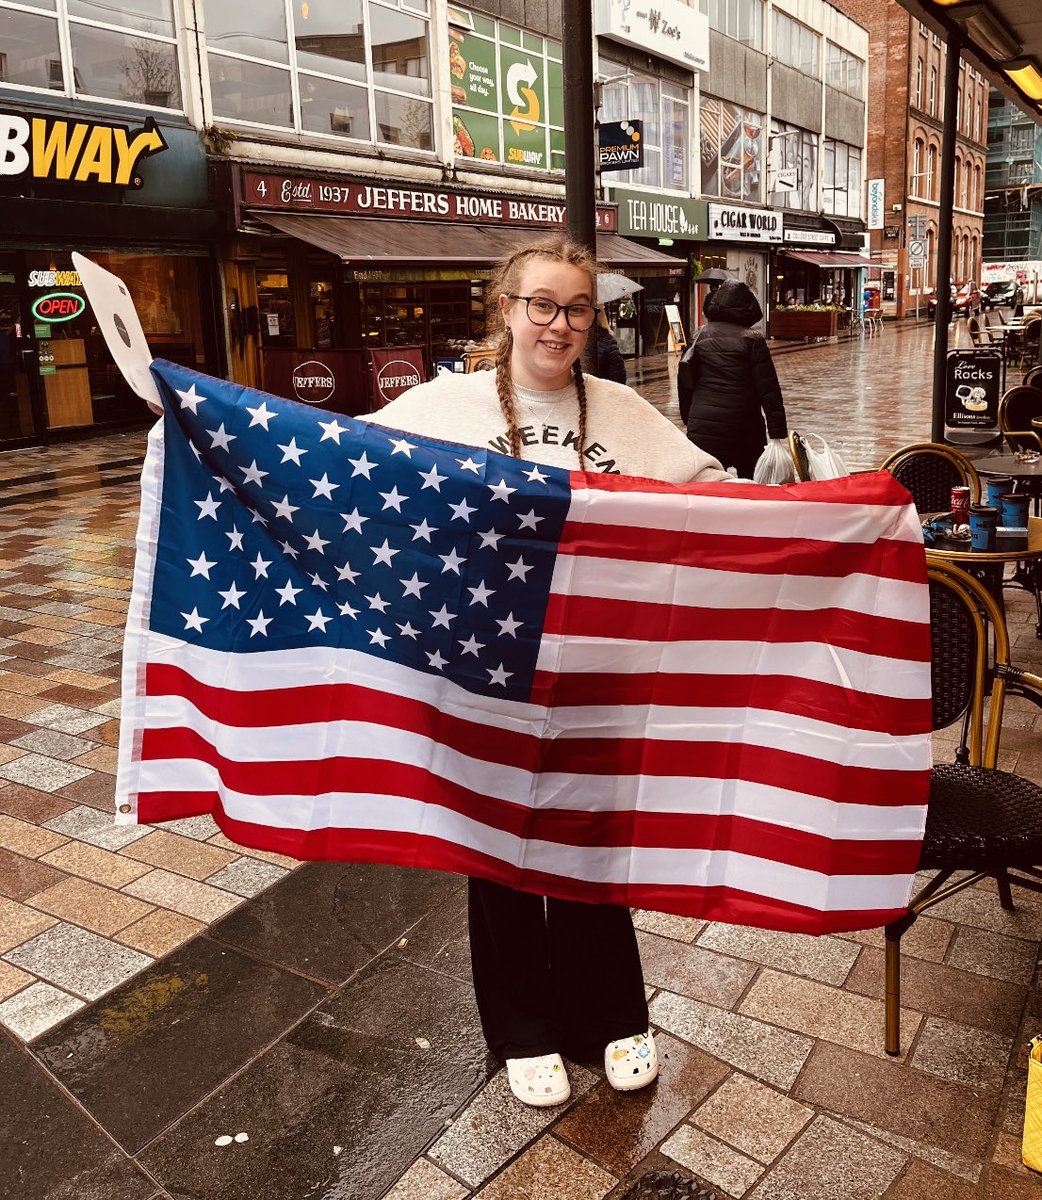 Good luck to NIYF’s Trustee & Executive Committee member Ciara following her dreams 💫 heading to work at camp America in a few weeks. We are so proud of you 🇺🇸 #keepshiningyourlight